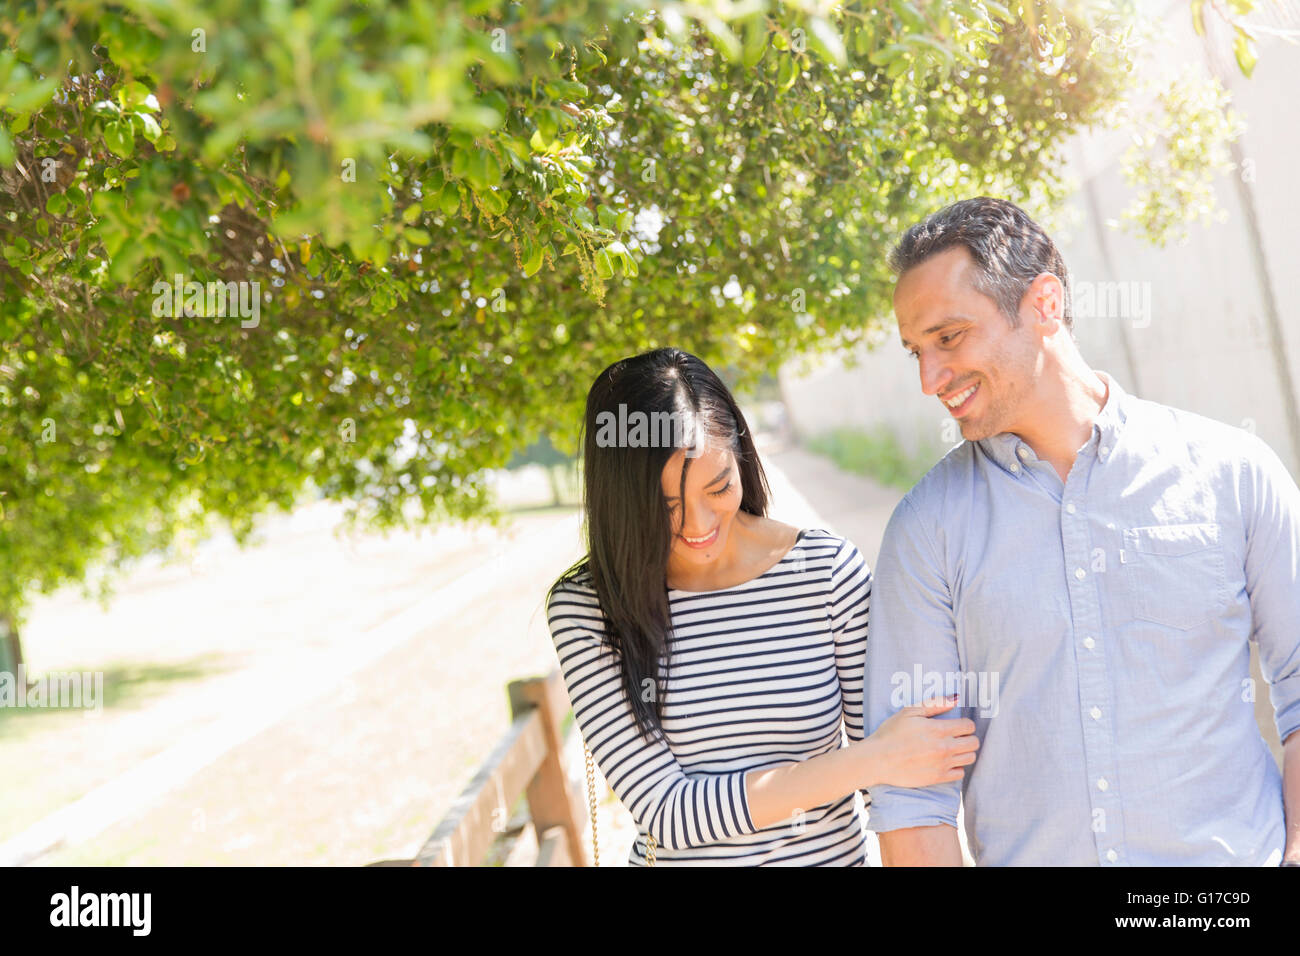 Couple underneath tree linking arms smiling Stock Photo